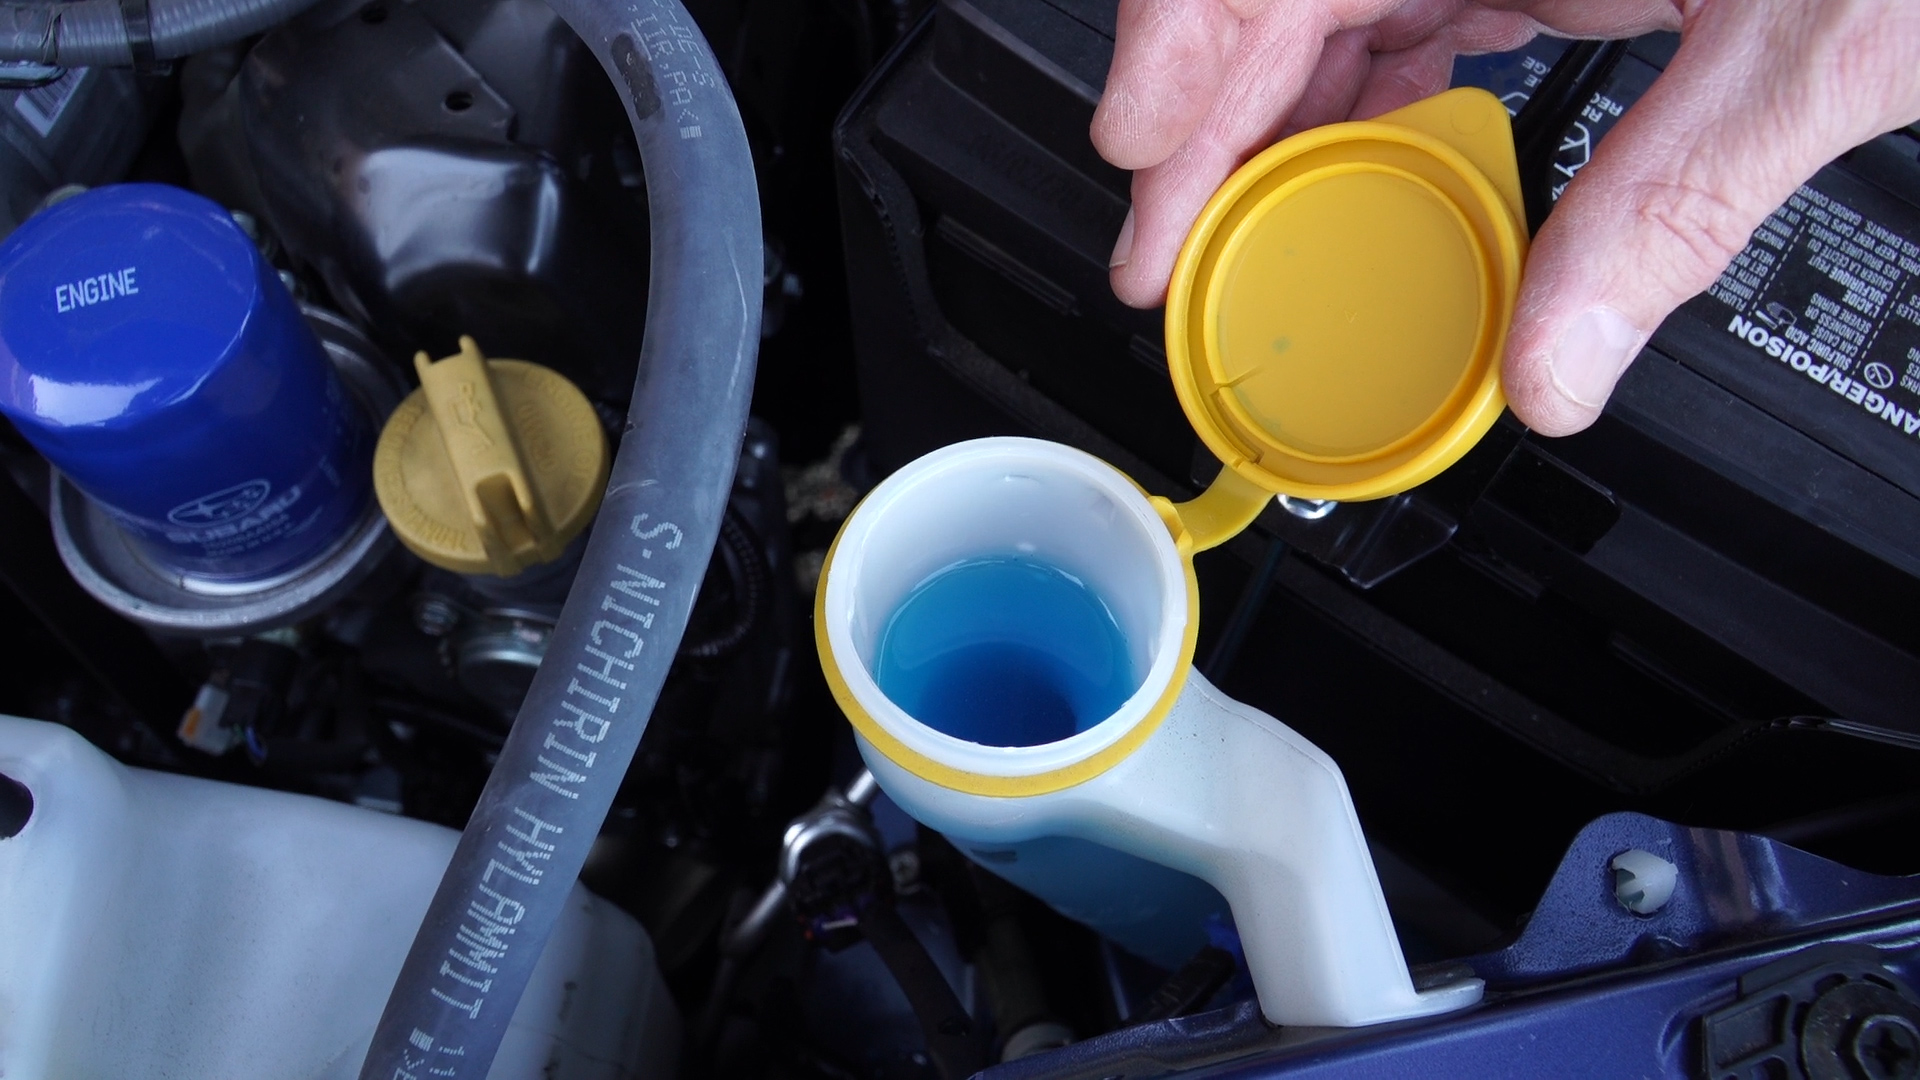 How to Check Your Windshield Wiper Fluid (DIY)